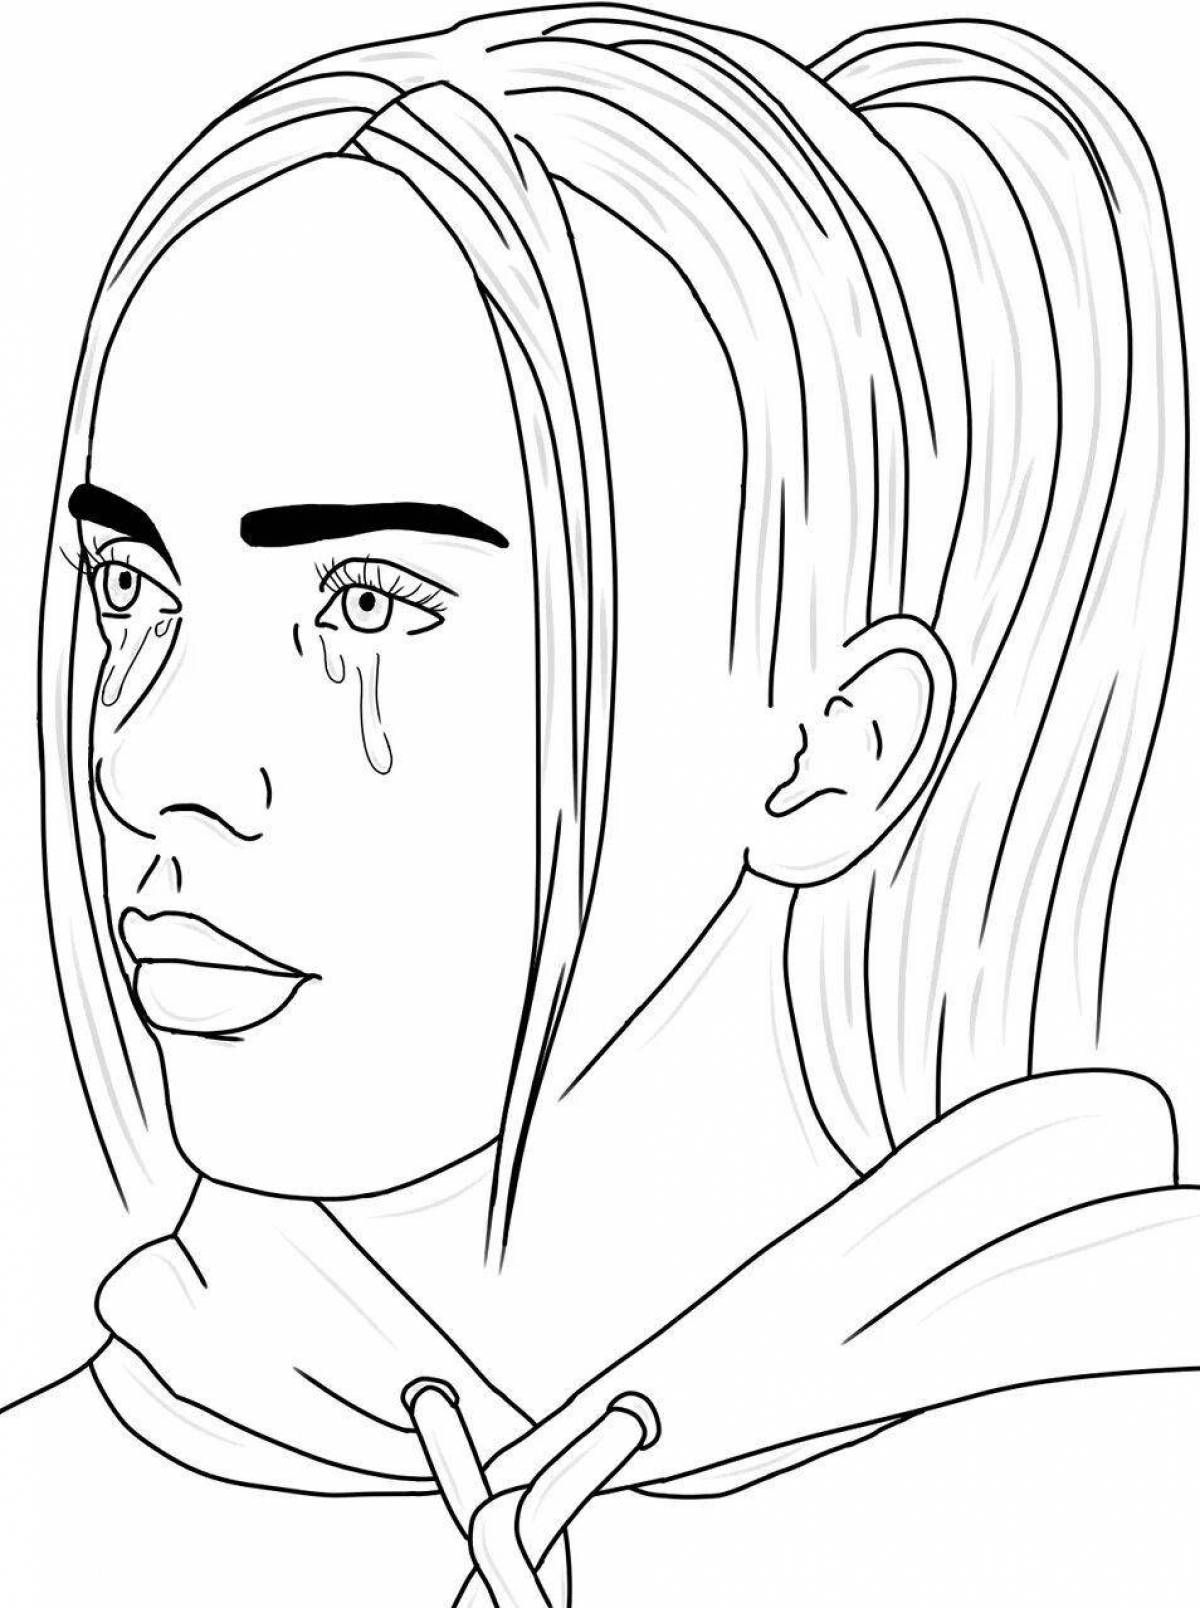 Color-lively mia smartly coloring page